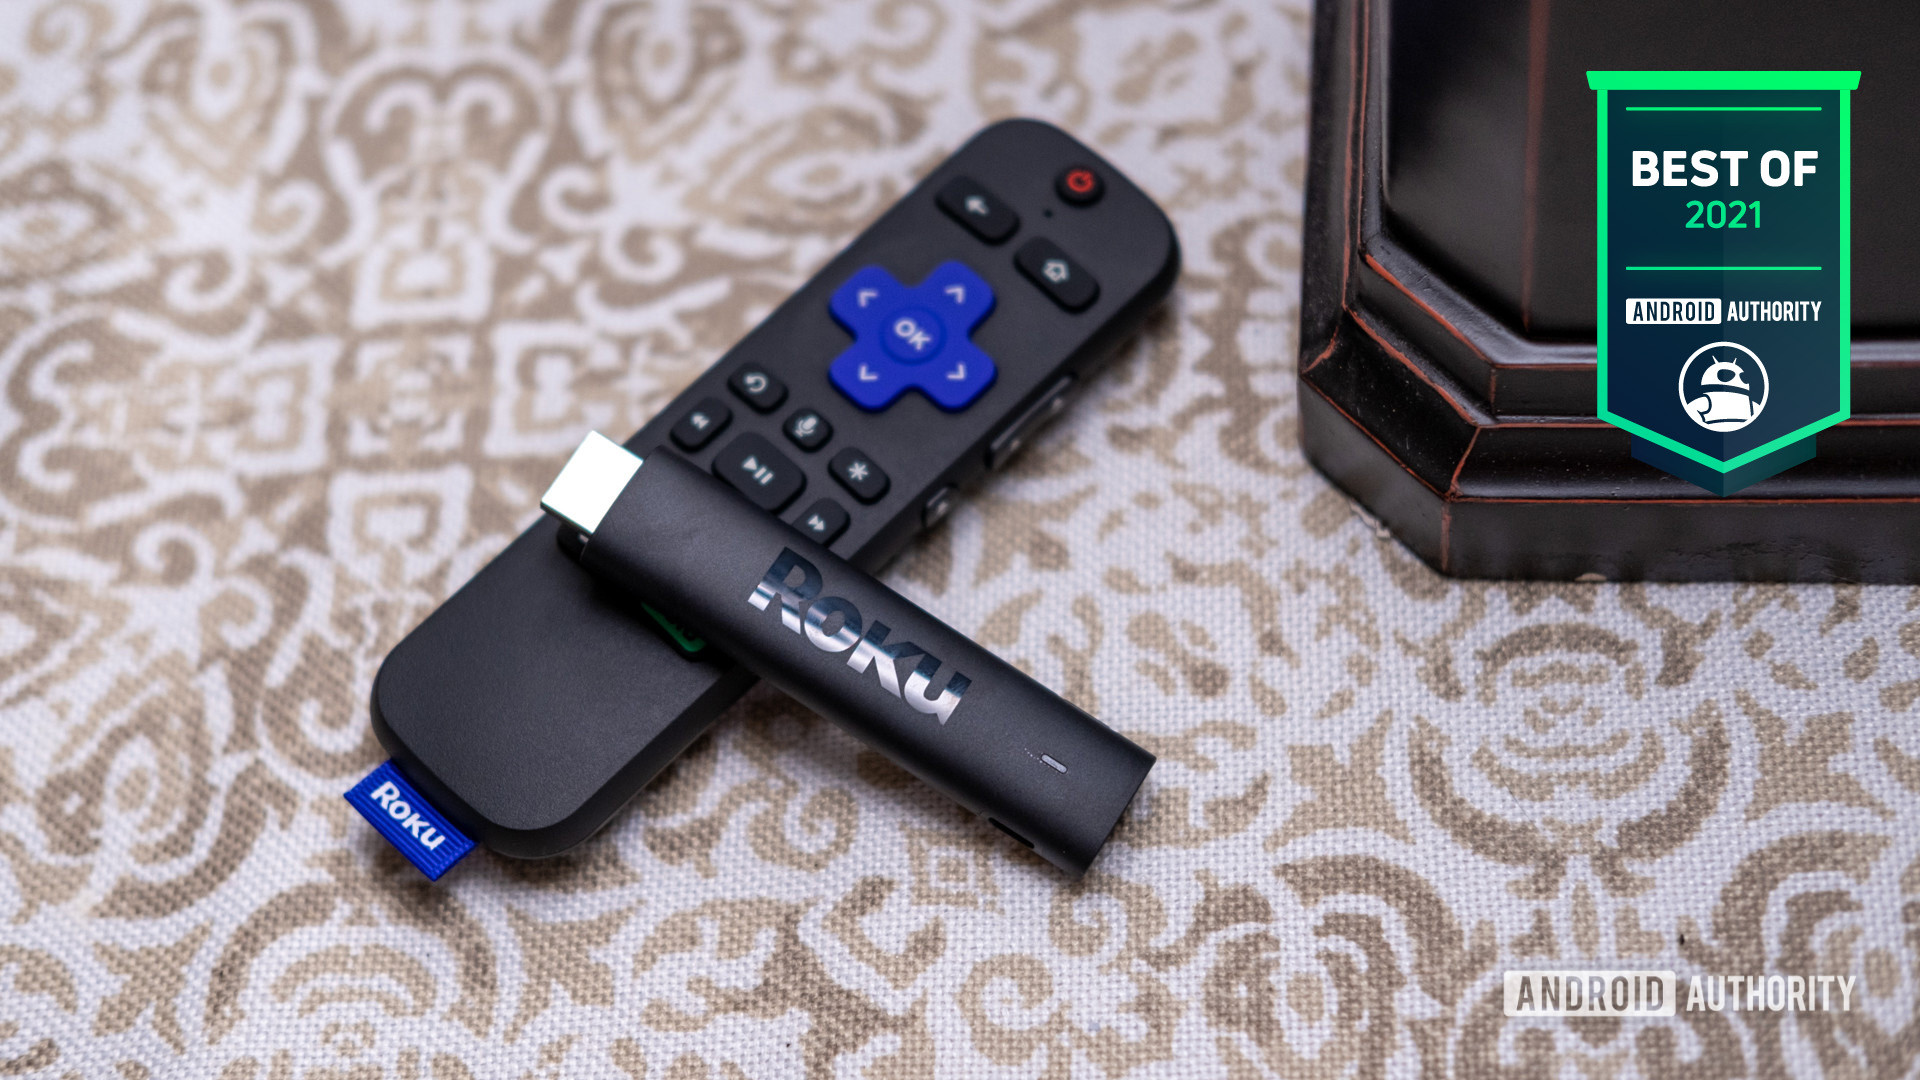 Roku streaming stick 4k Android Authority Best of 2021 badge